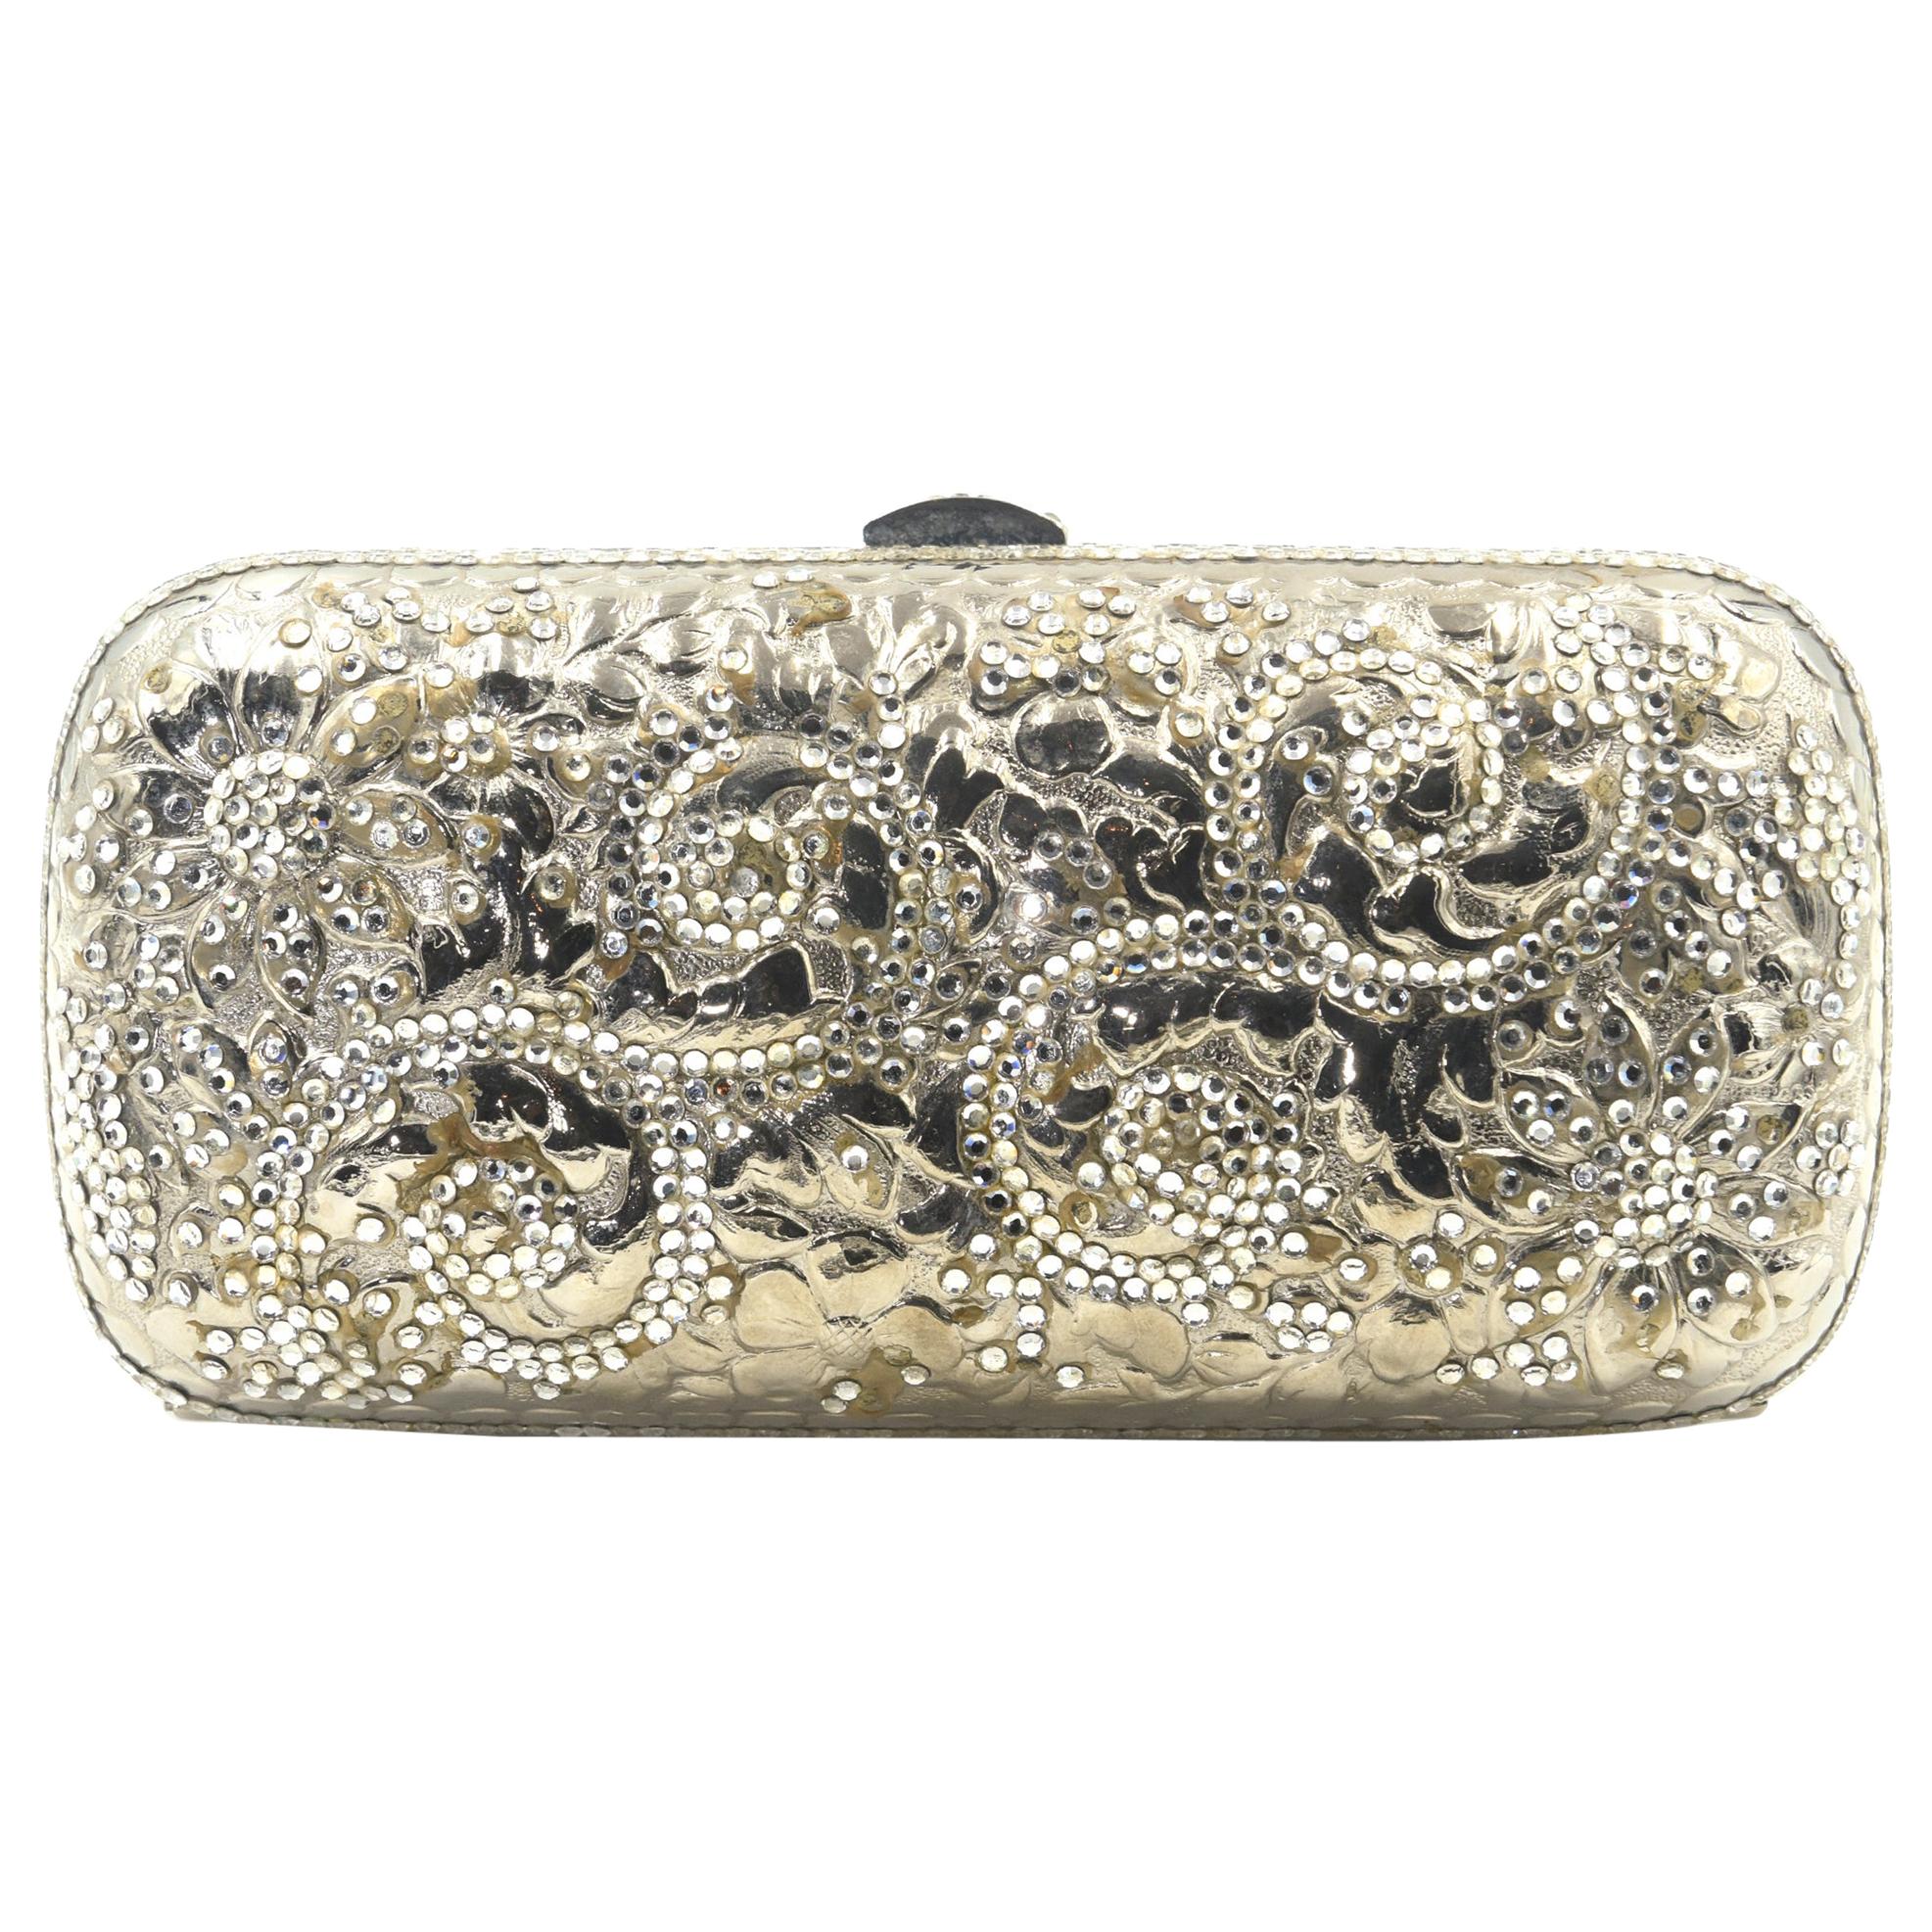 Judith Leiber's sparkly clutch bags have made a comeback - but the